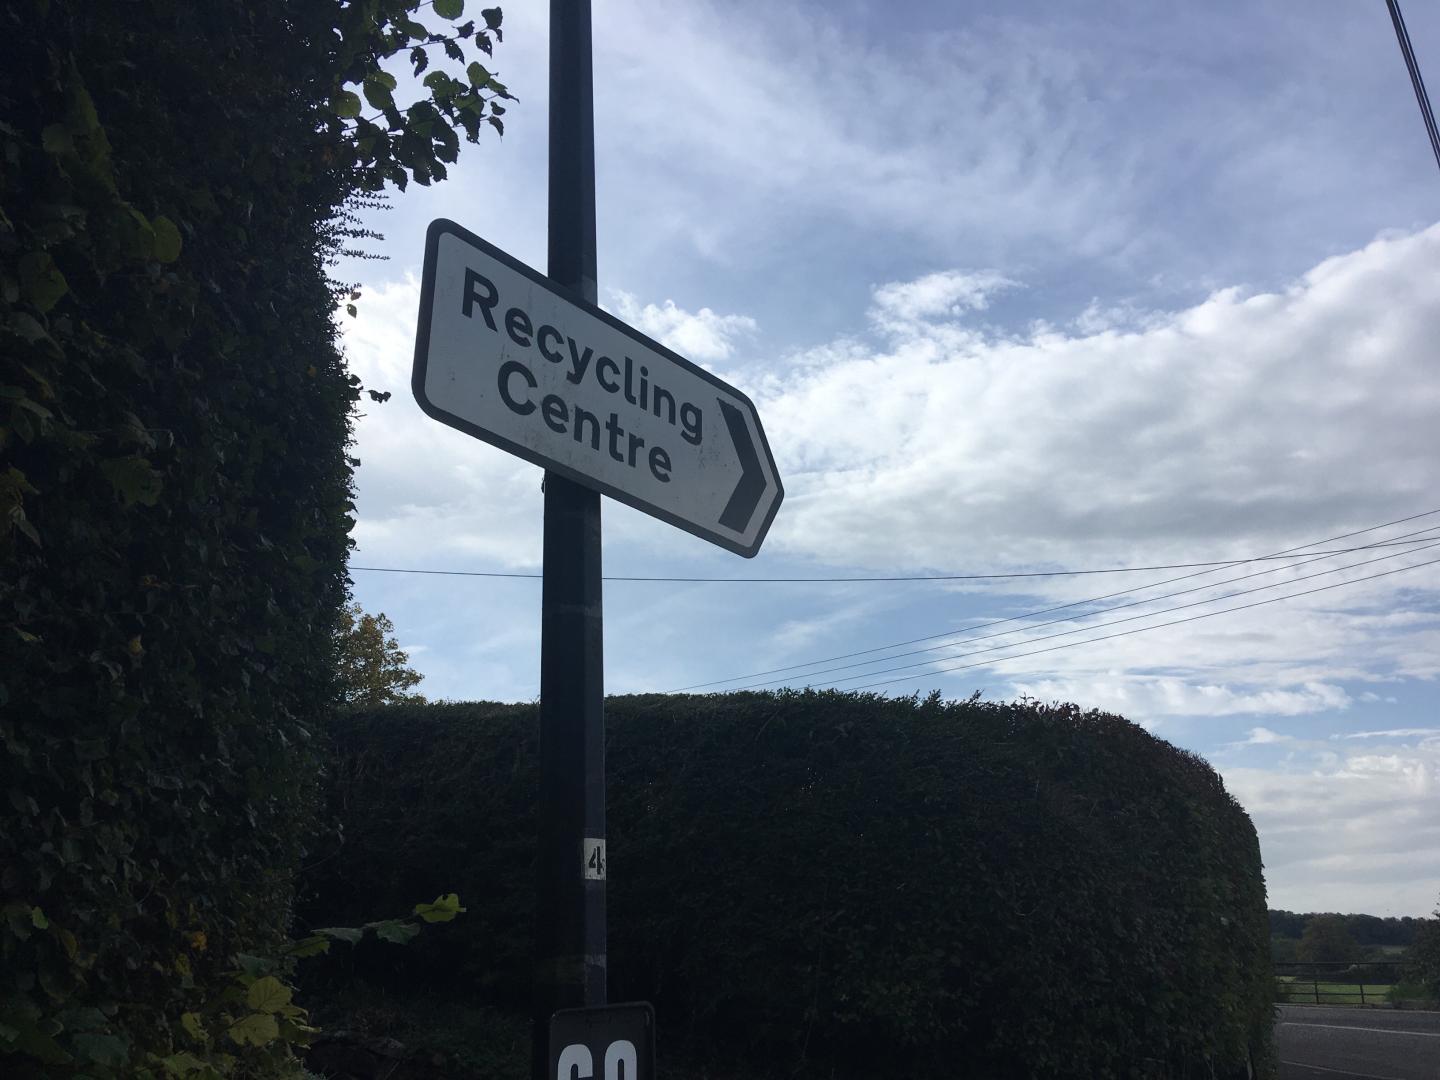 A photo of a direction road sign pointing towards Backwell Recycling Centre